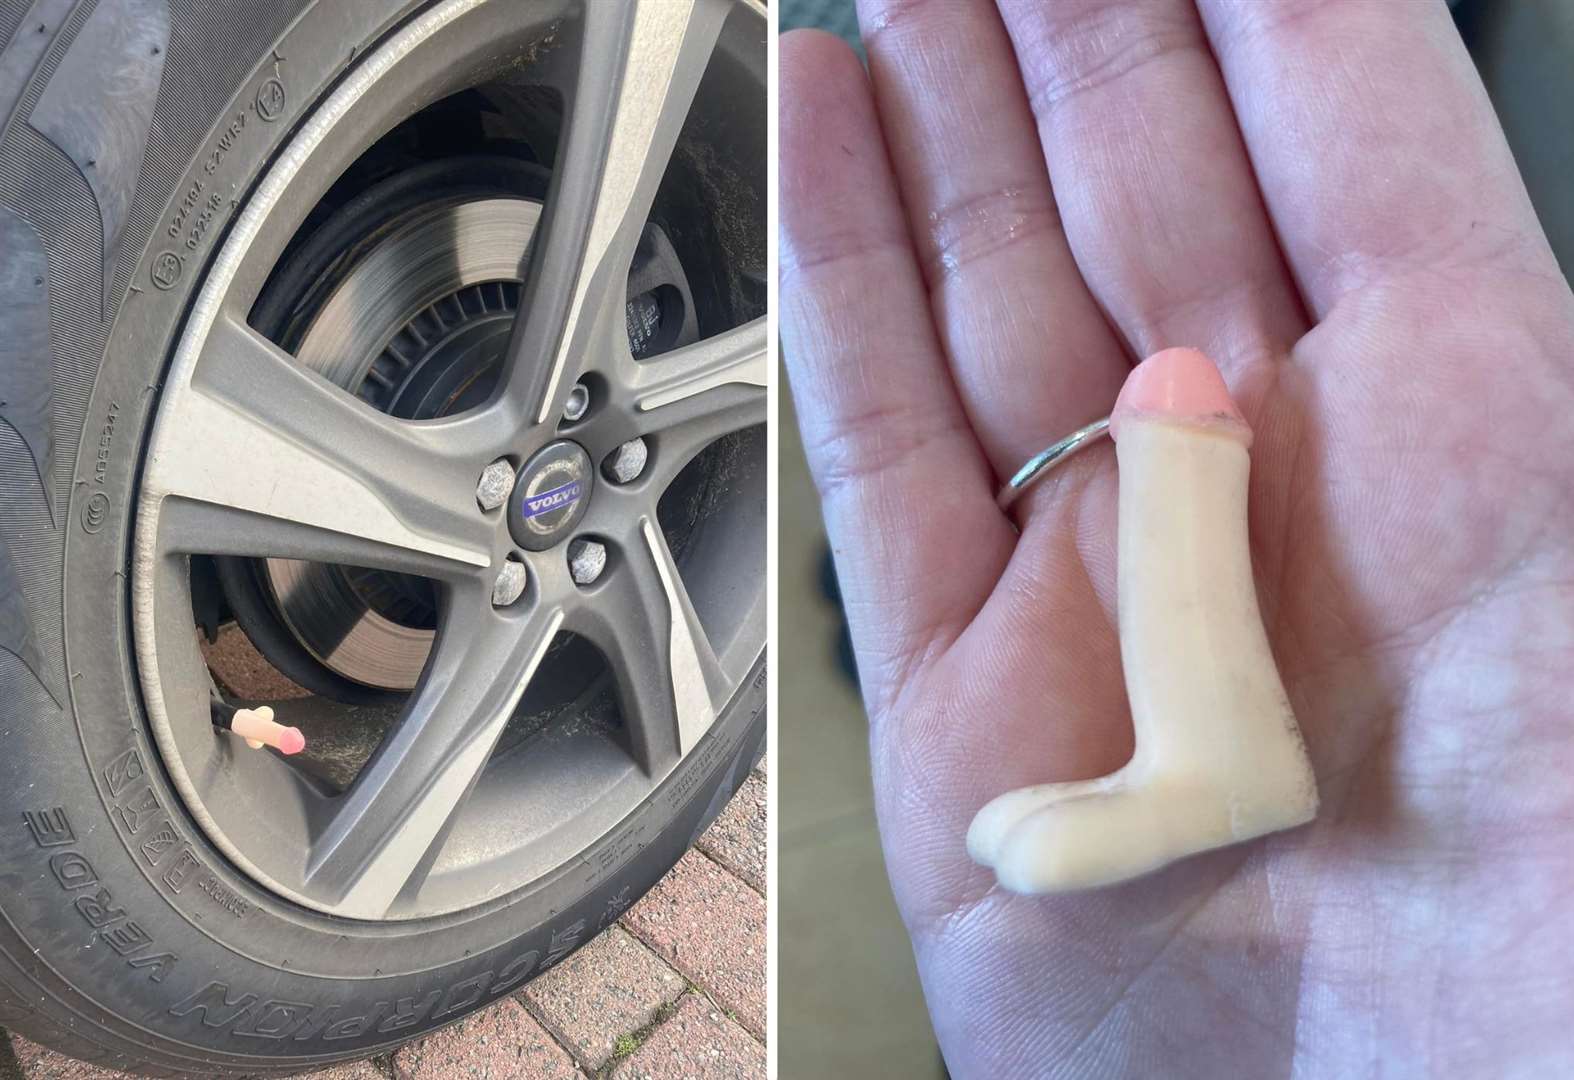 'Who put a penis on my car?'